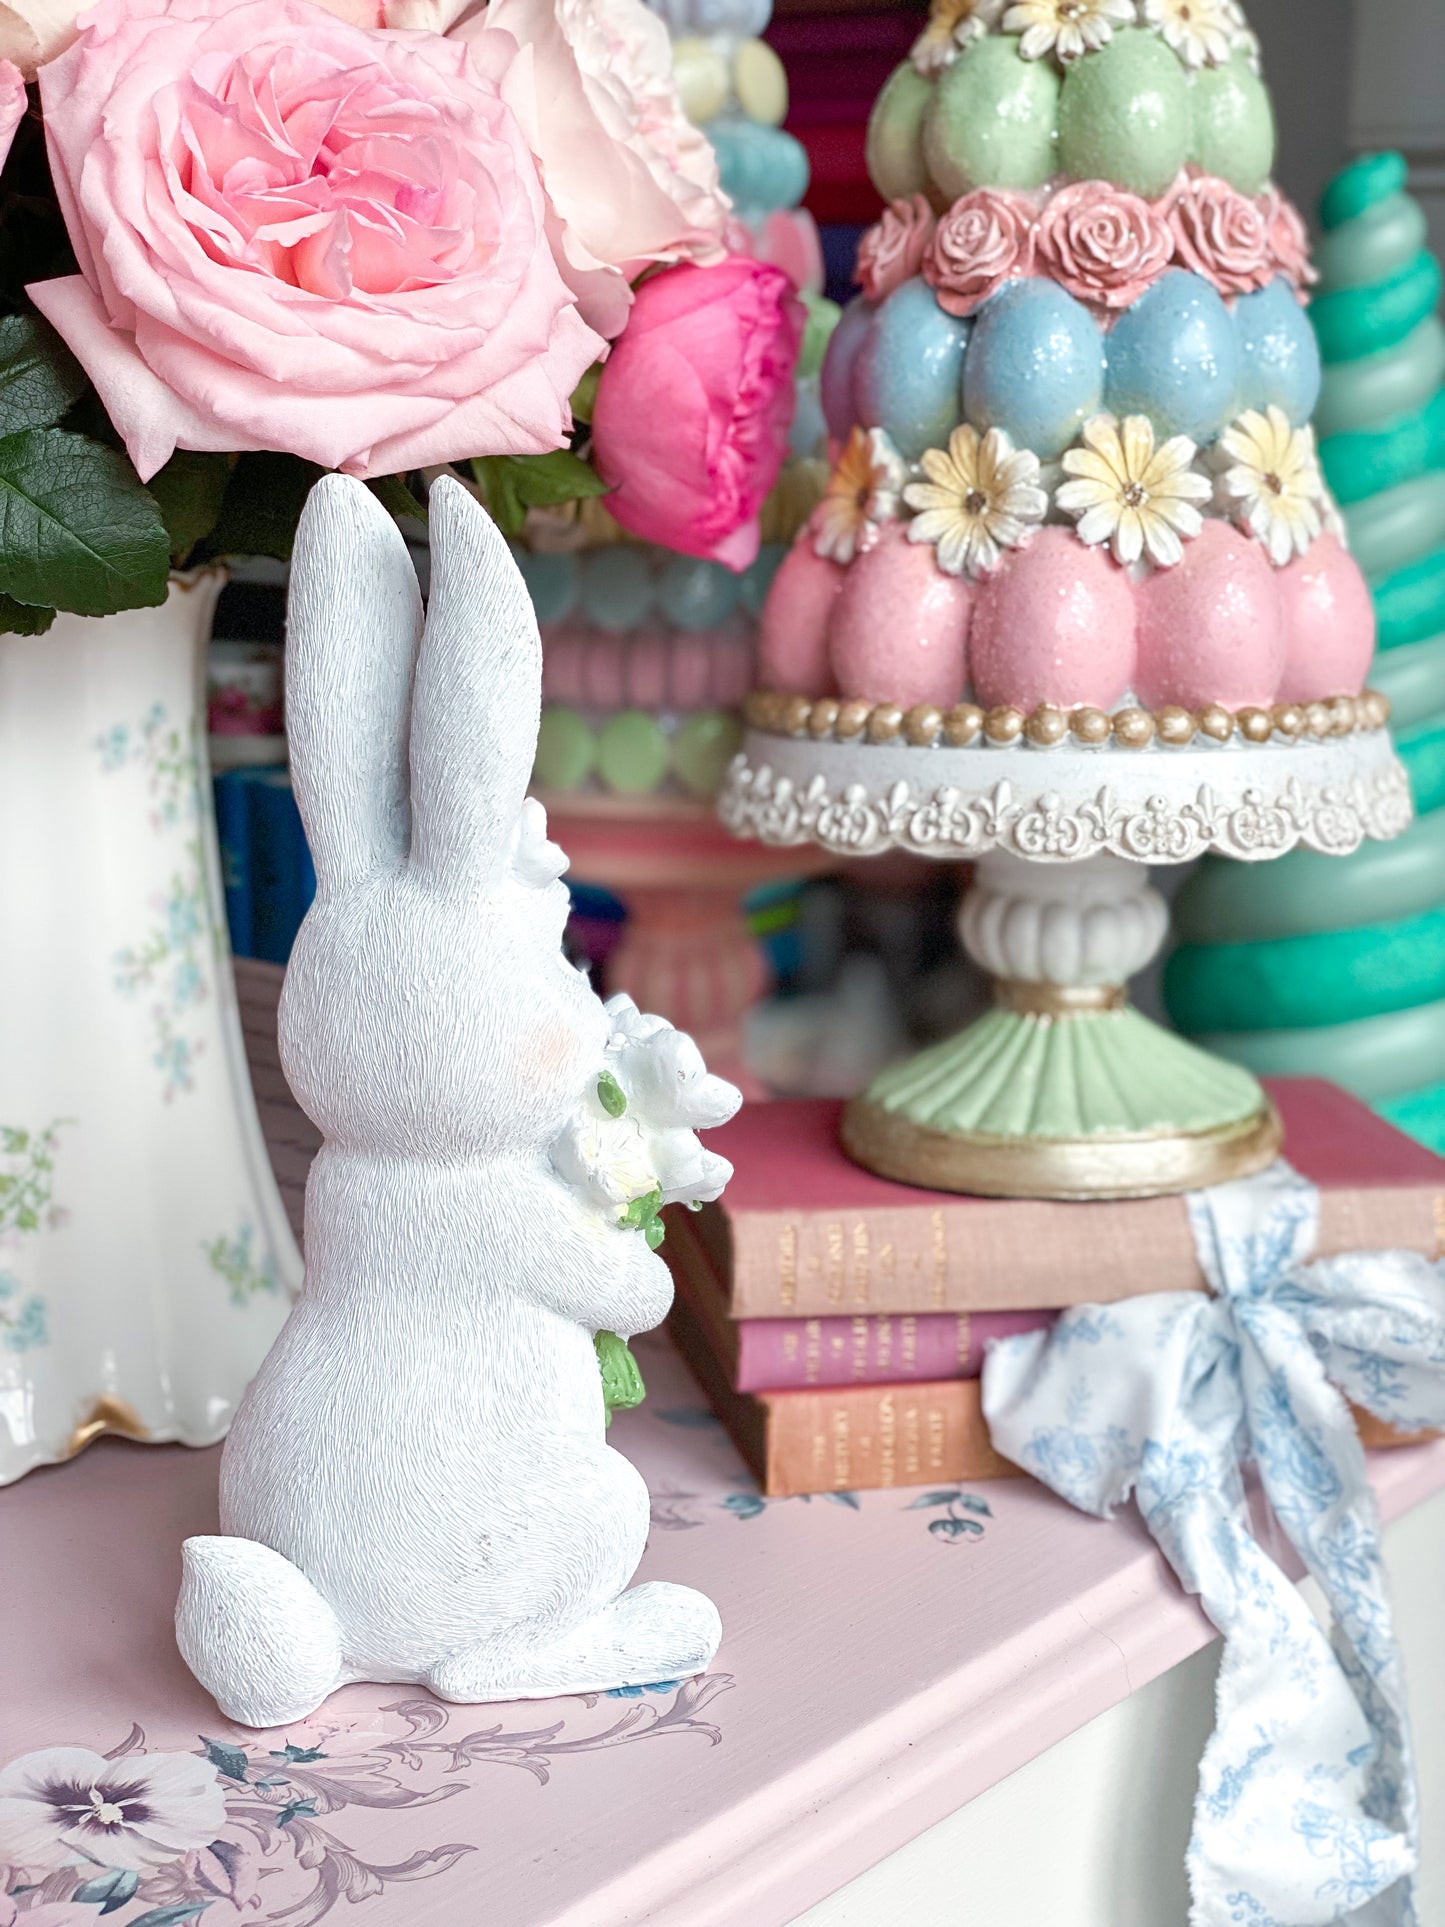 Bunny Figurine sniffing Pastel Flowers